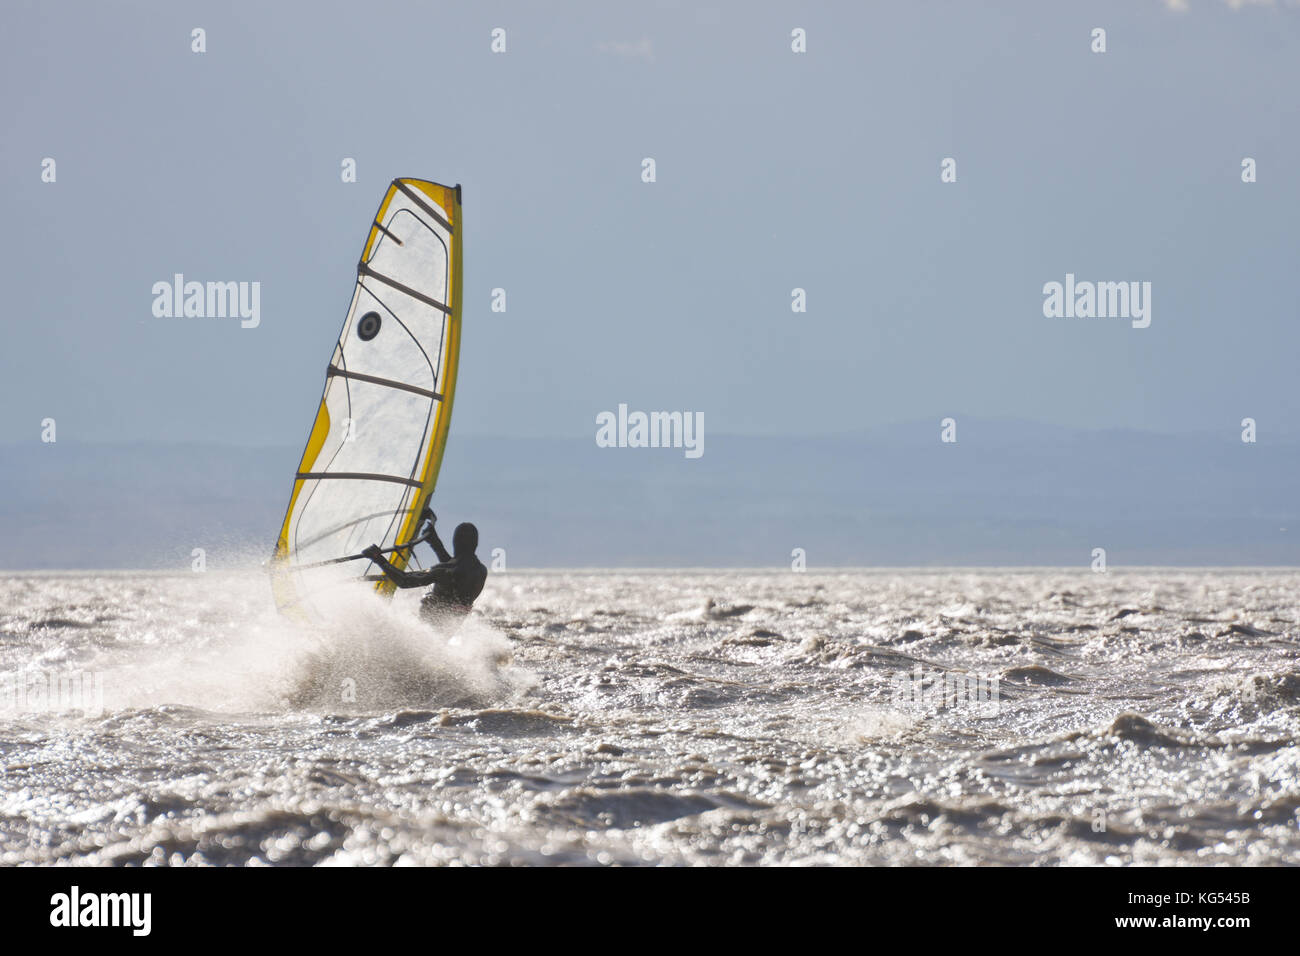 Windsurfer in a storm surfing up to the horizon. Stock Photo